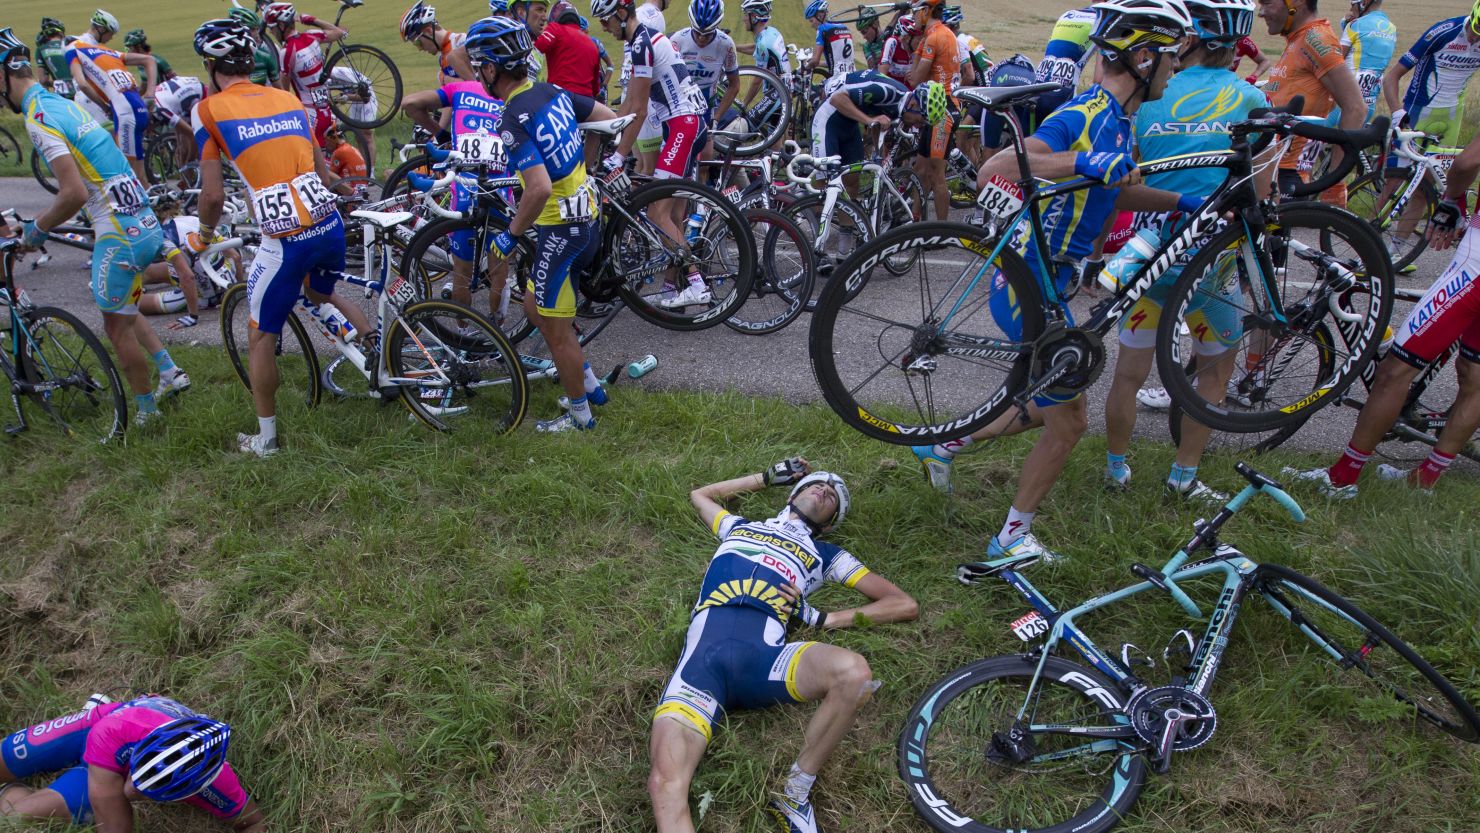 Pain game: Dutchman Wouter Poels falls victim to the mass pile-up on the sixth stage of the Tour de France.